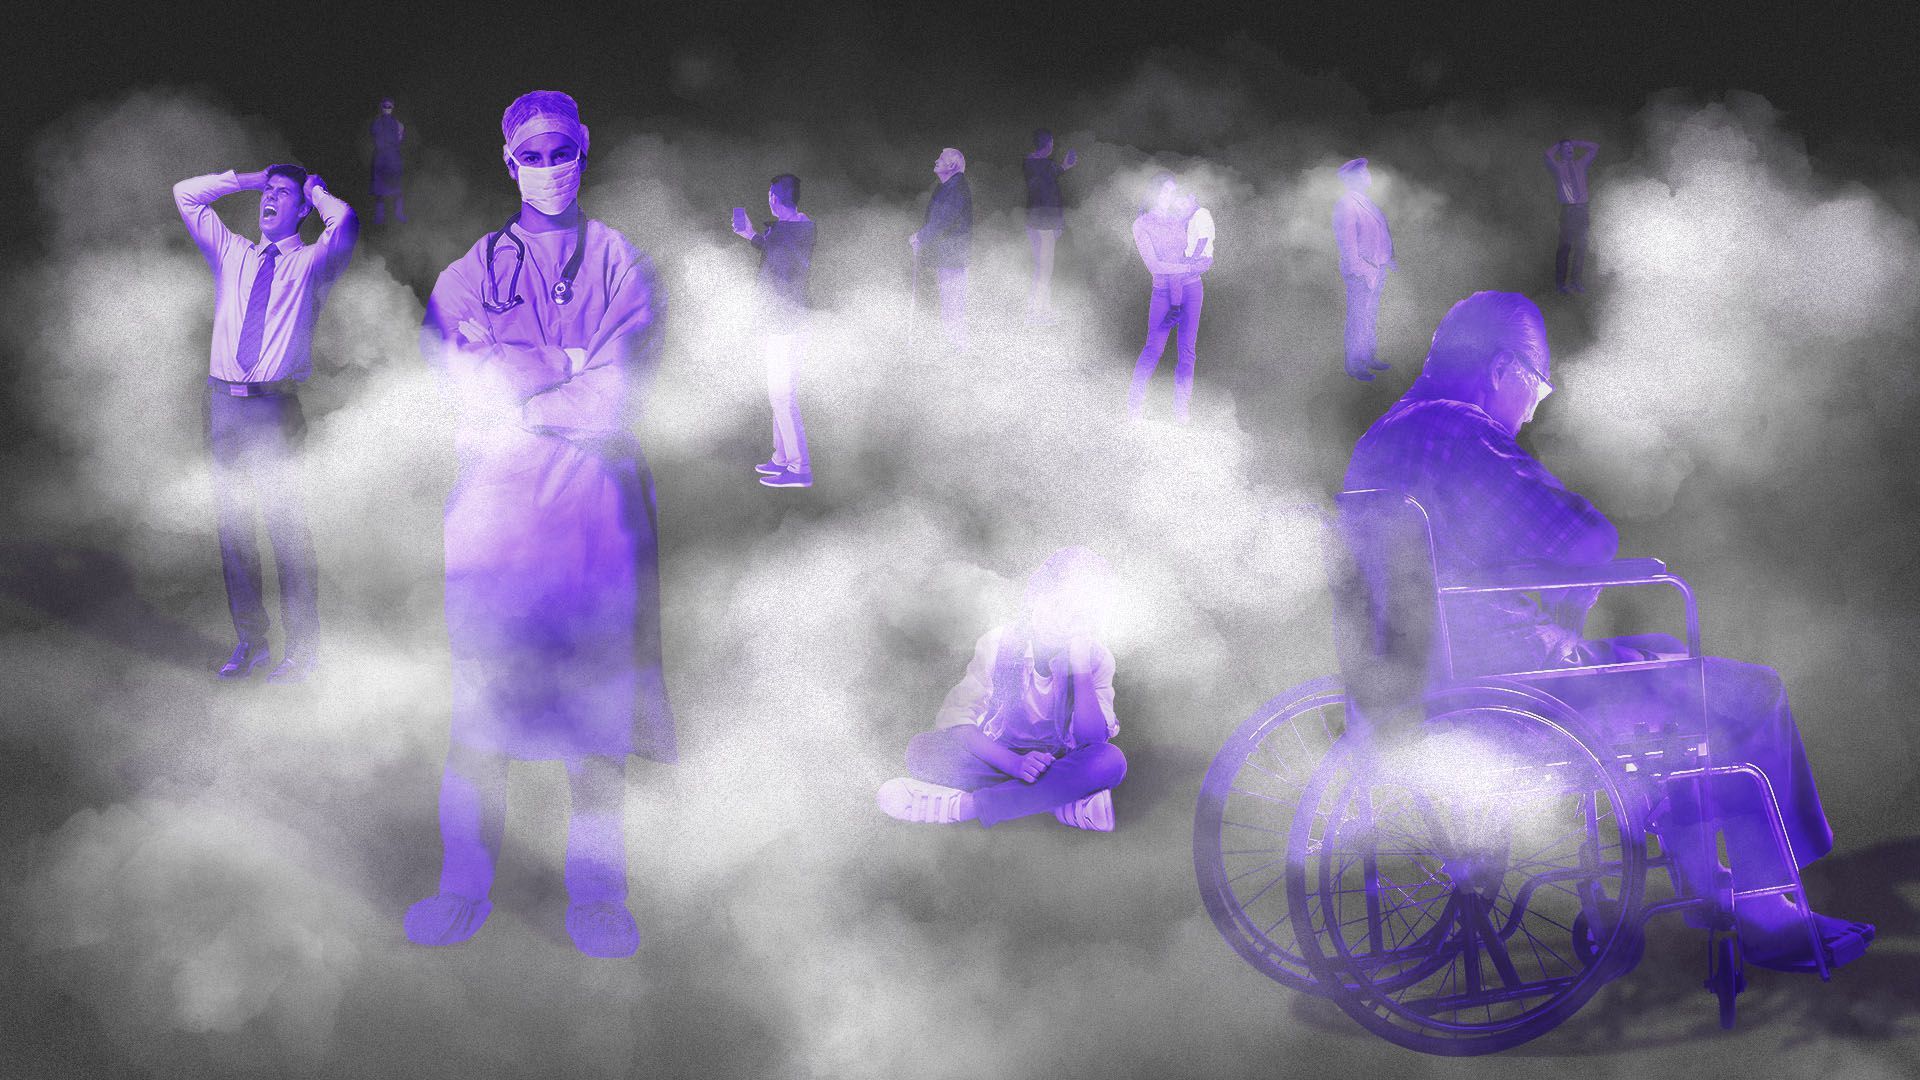 Illustration of various people in a fog